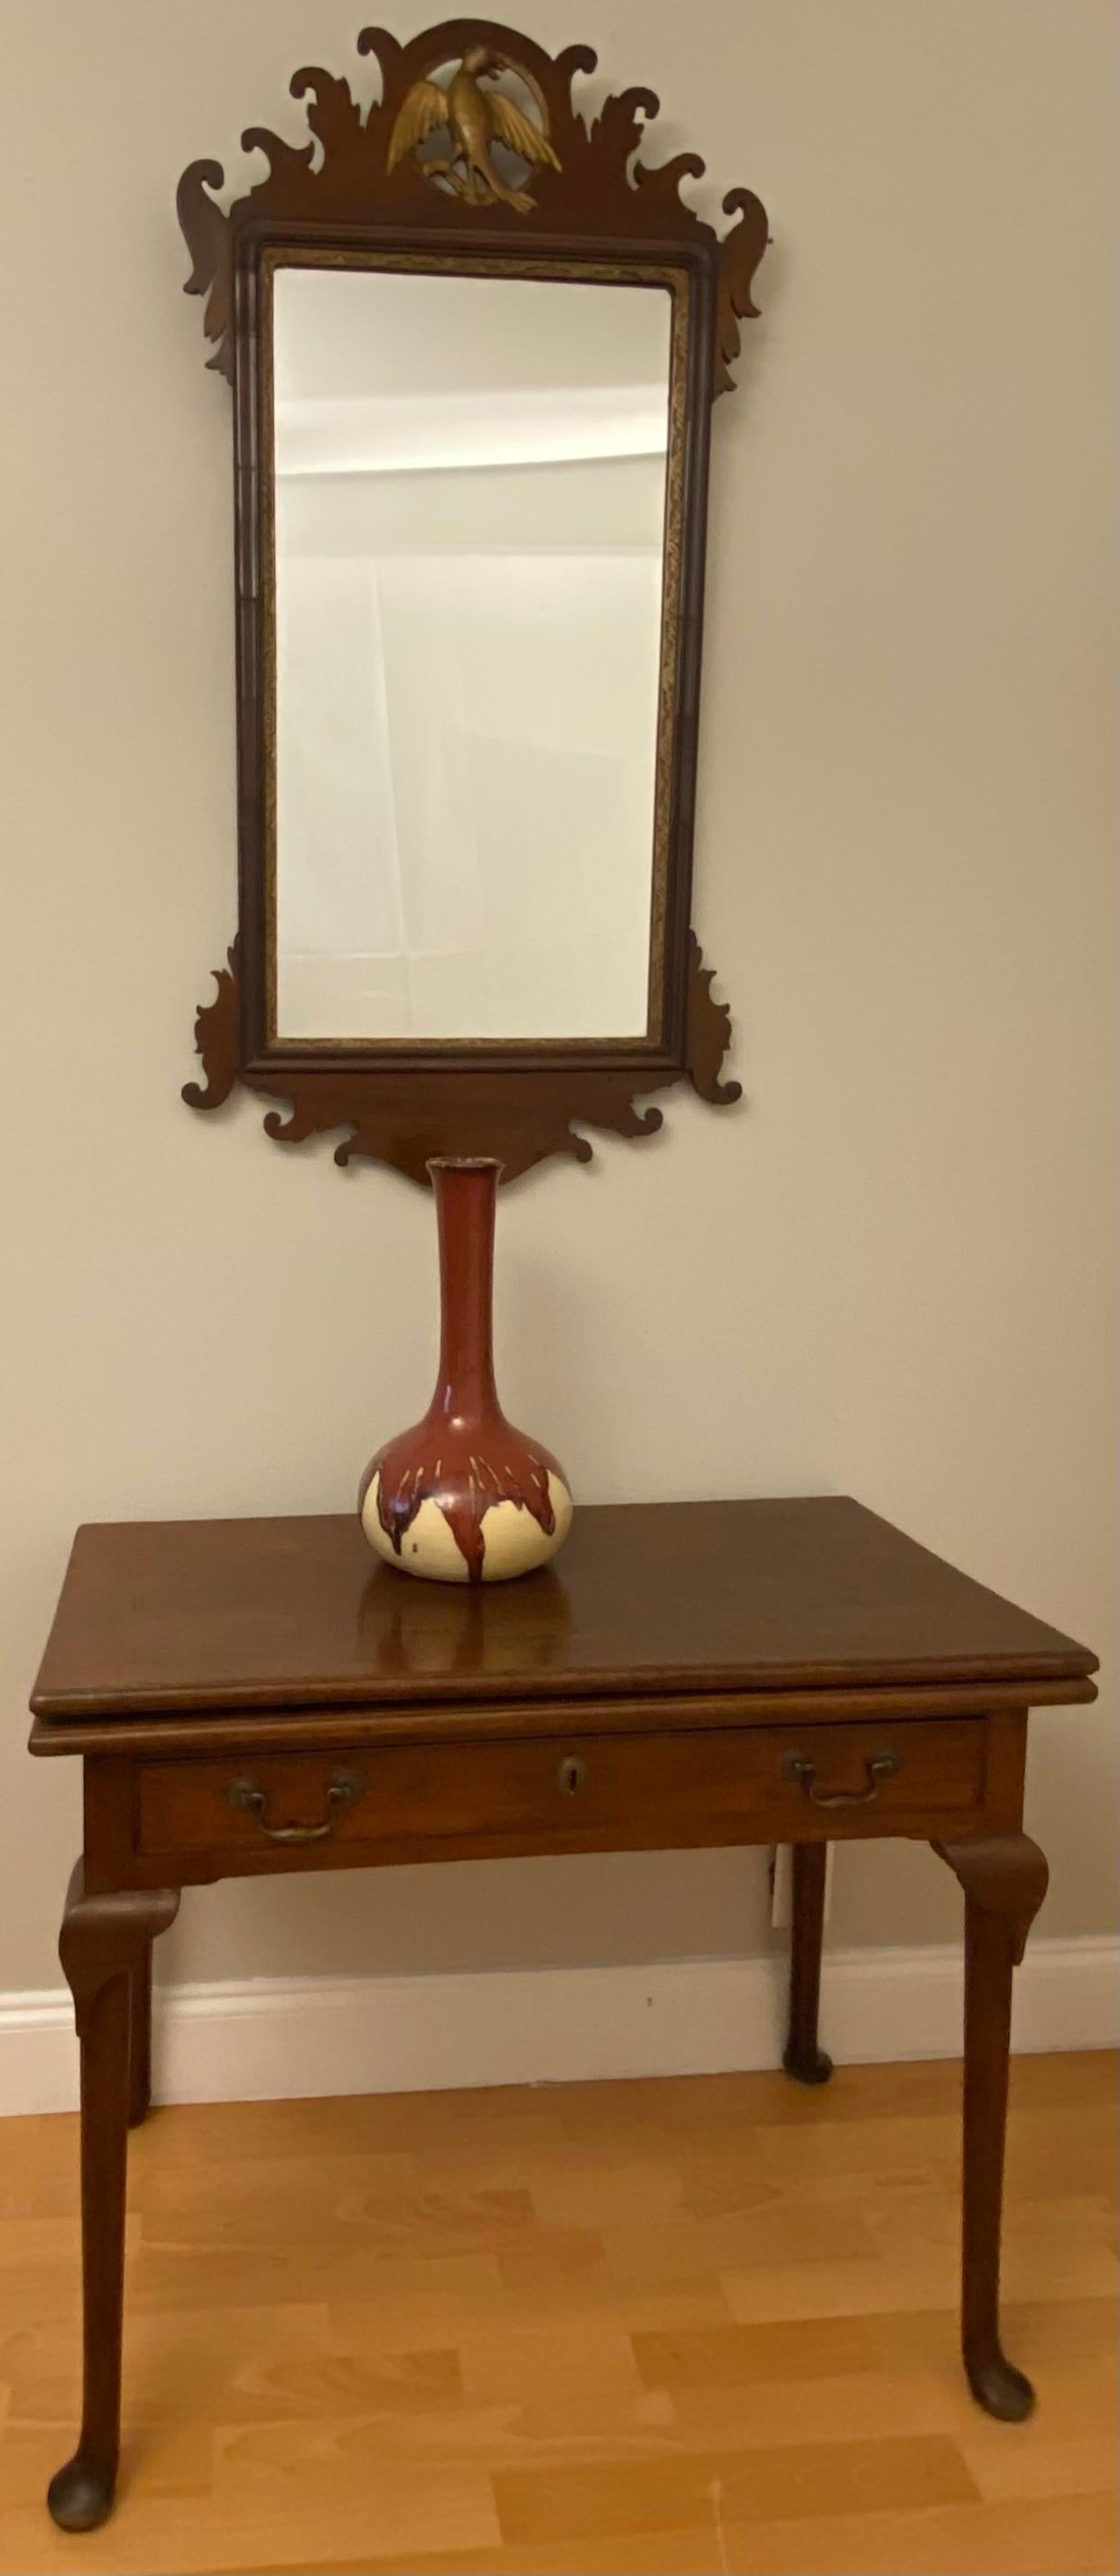 18th Century Early American Federal Period Mahogany Console or Accent Side Table For Sale 4